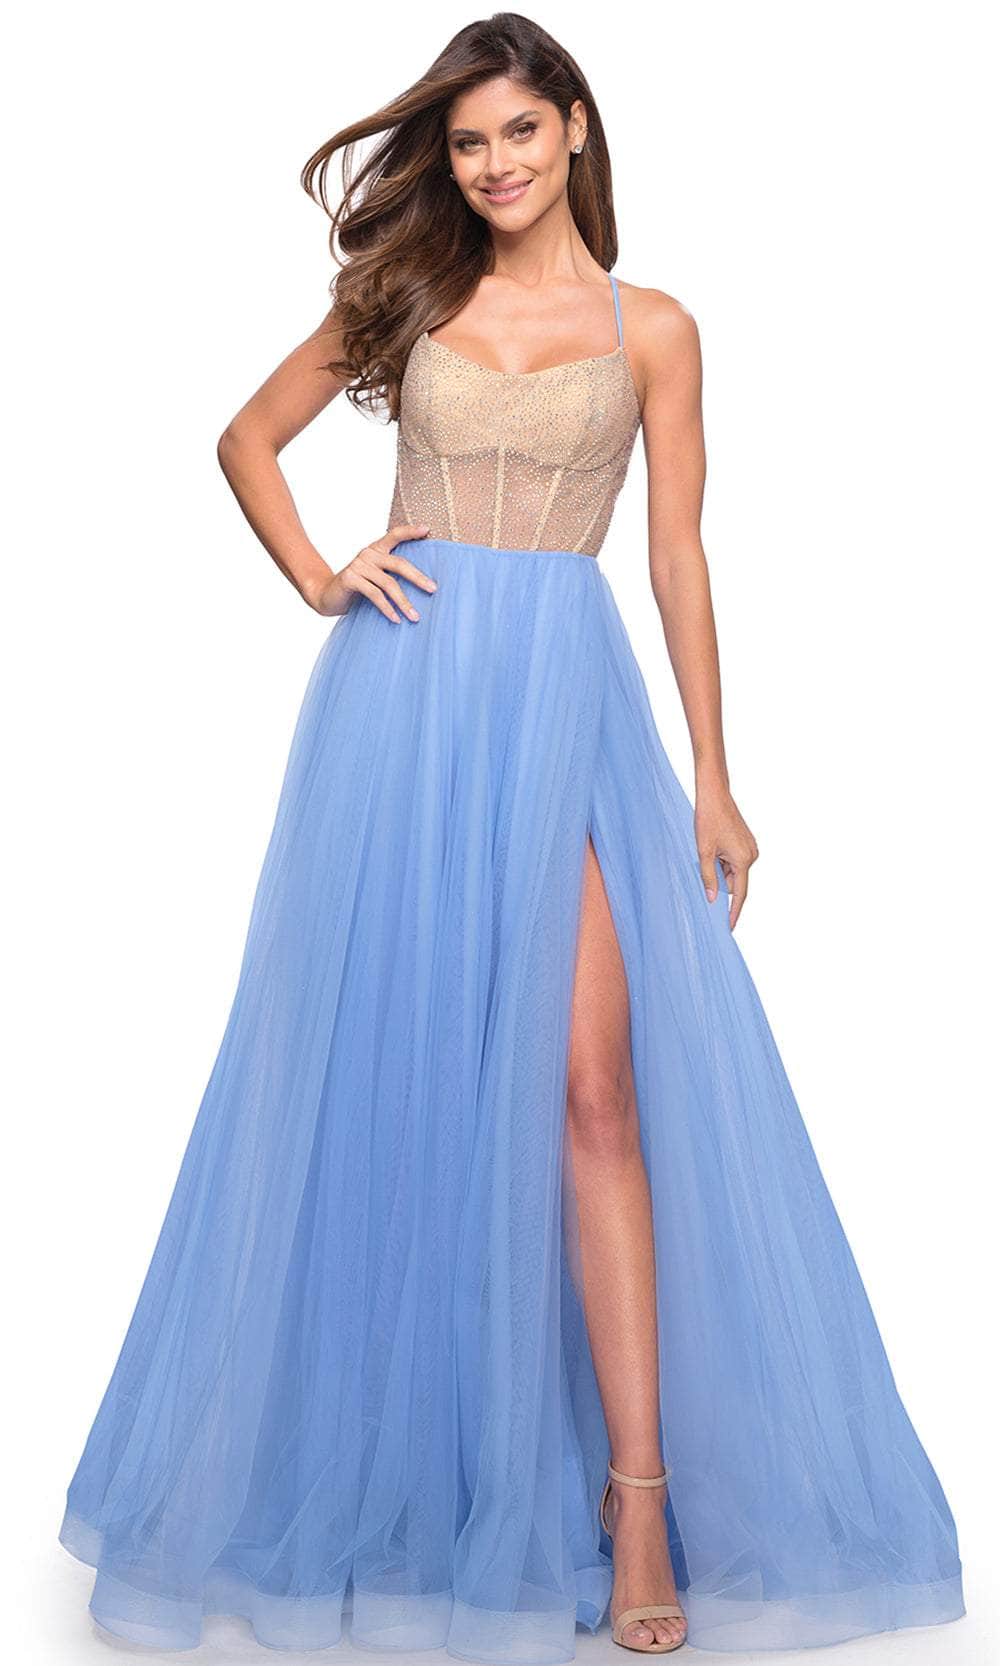 Image of La Femme 30697 - Corset Bodice Tulle Formal Gown